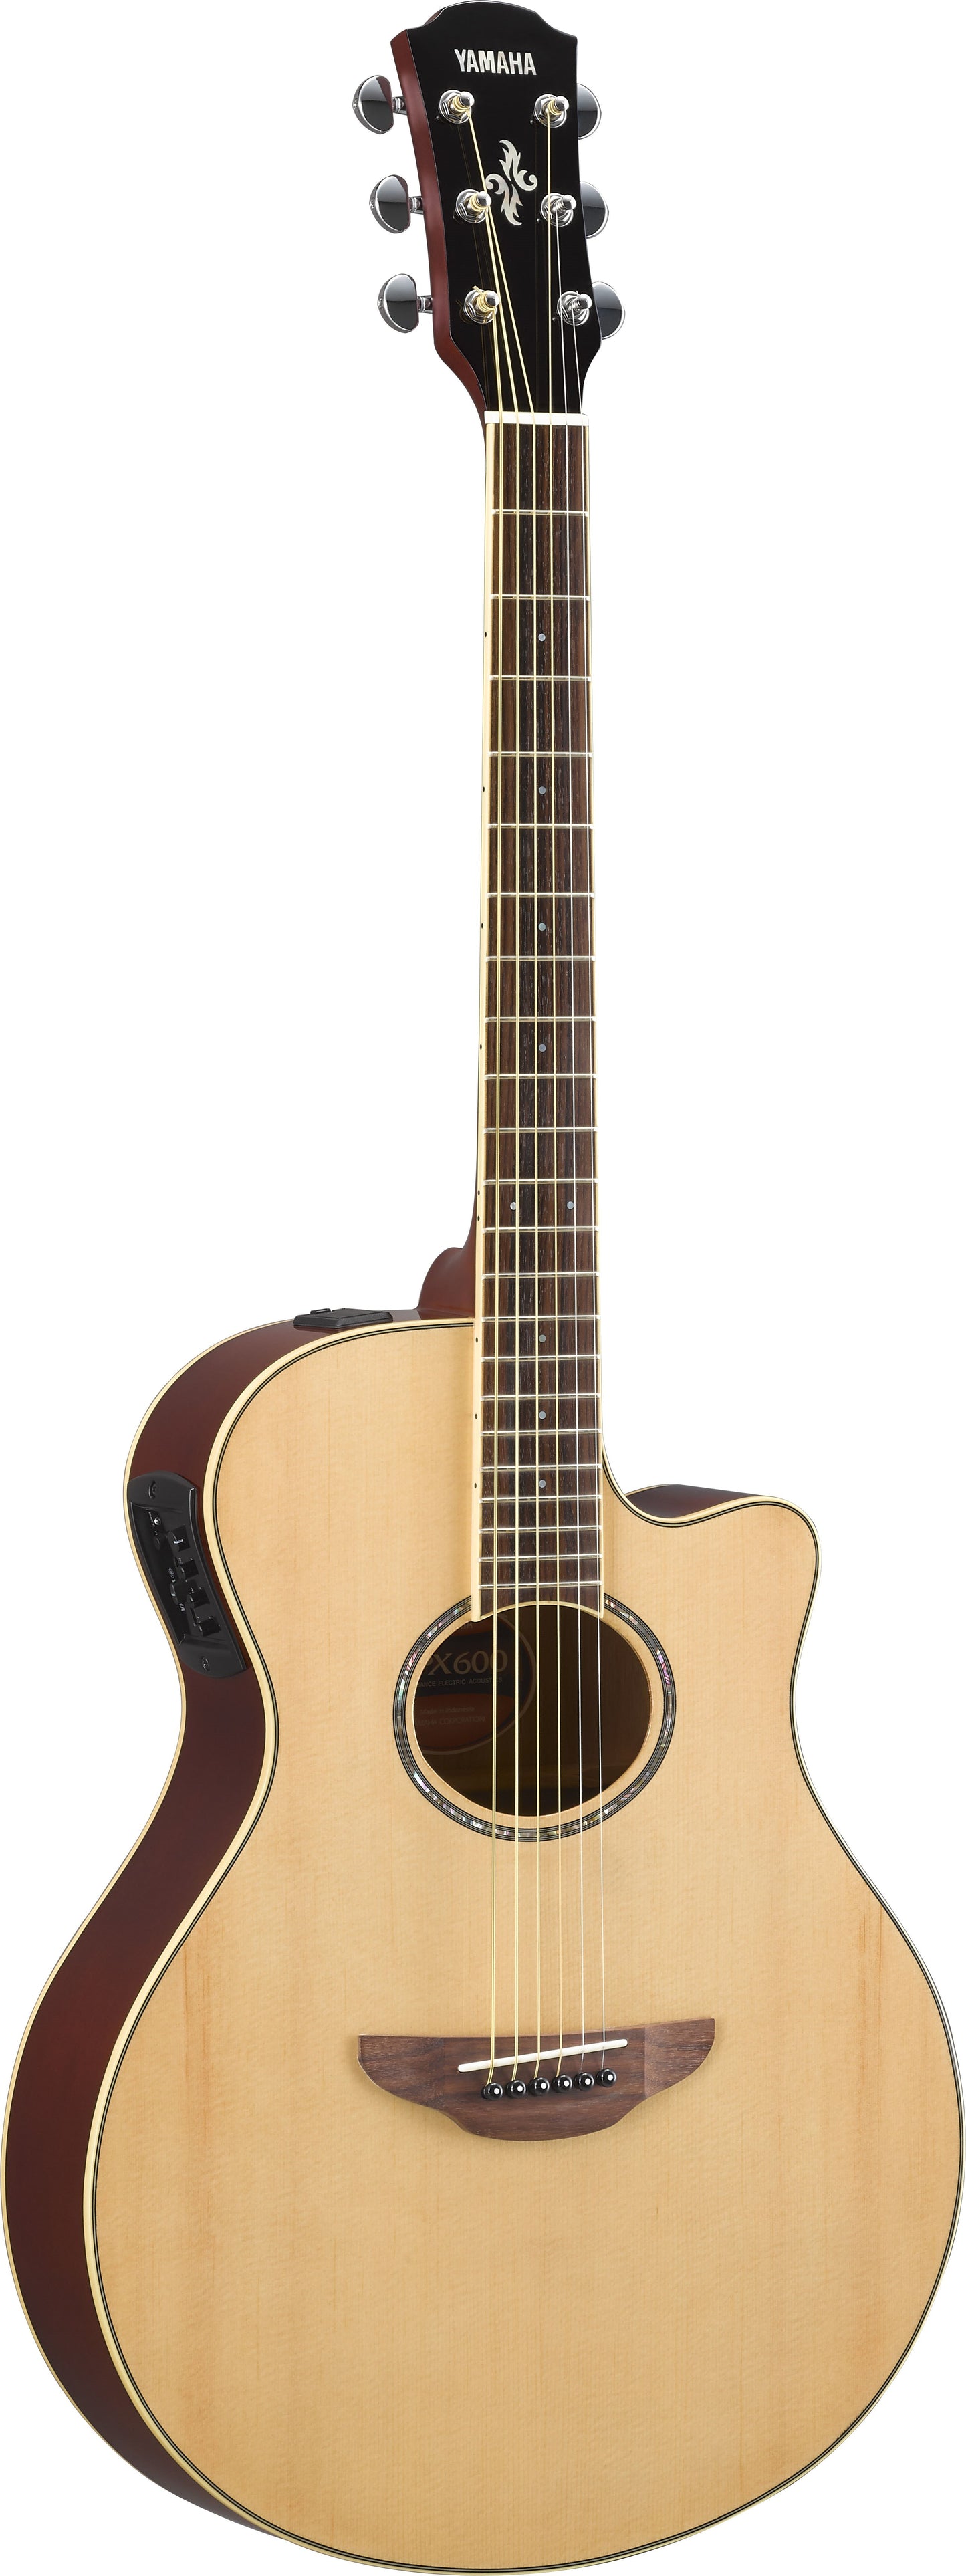 Yamaha APX600 Acoustic With Pickup - Natural